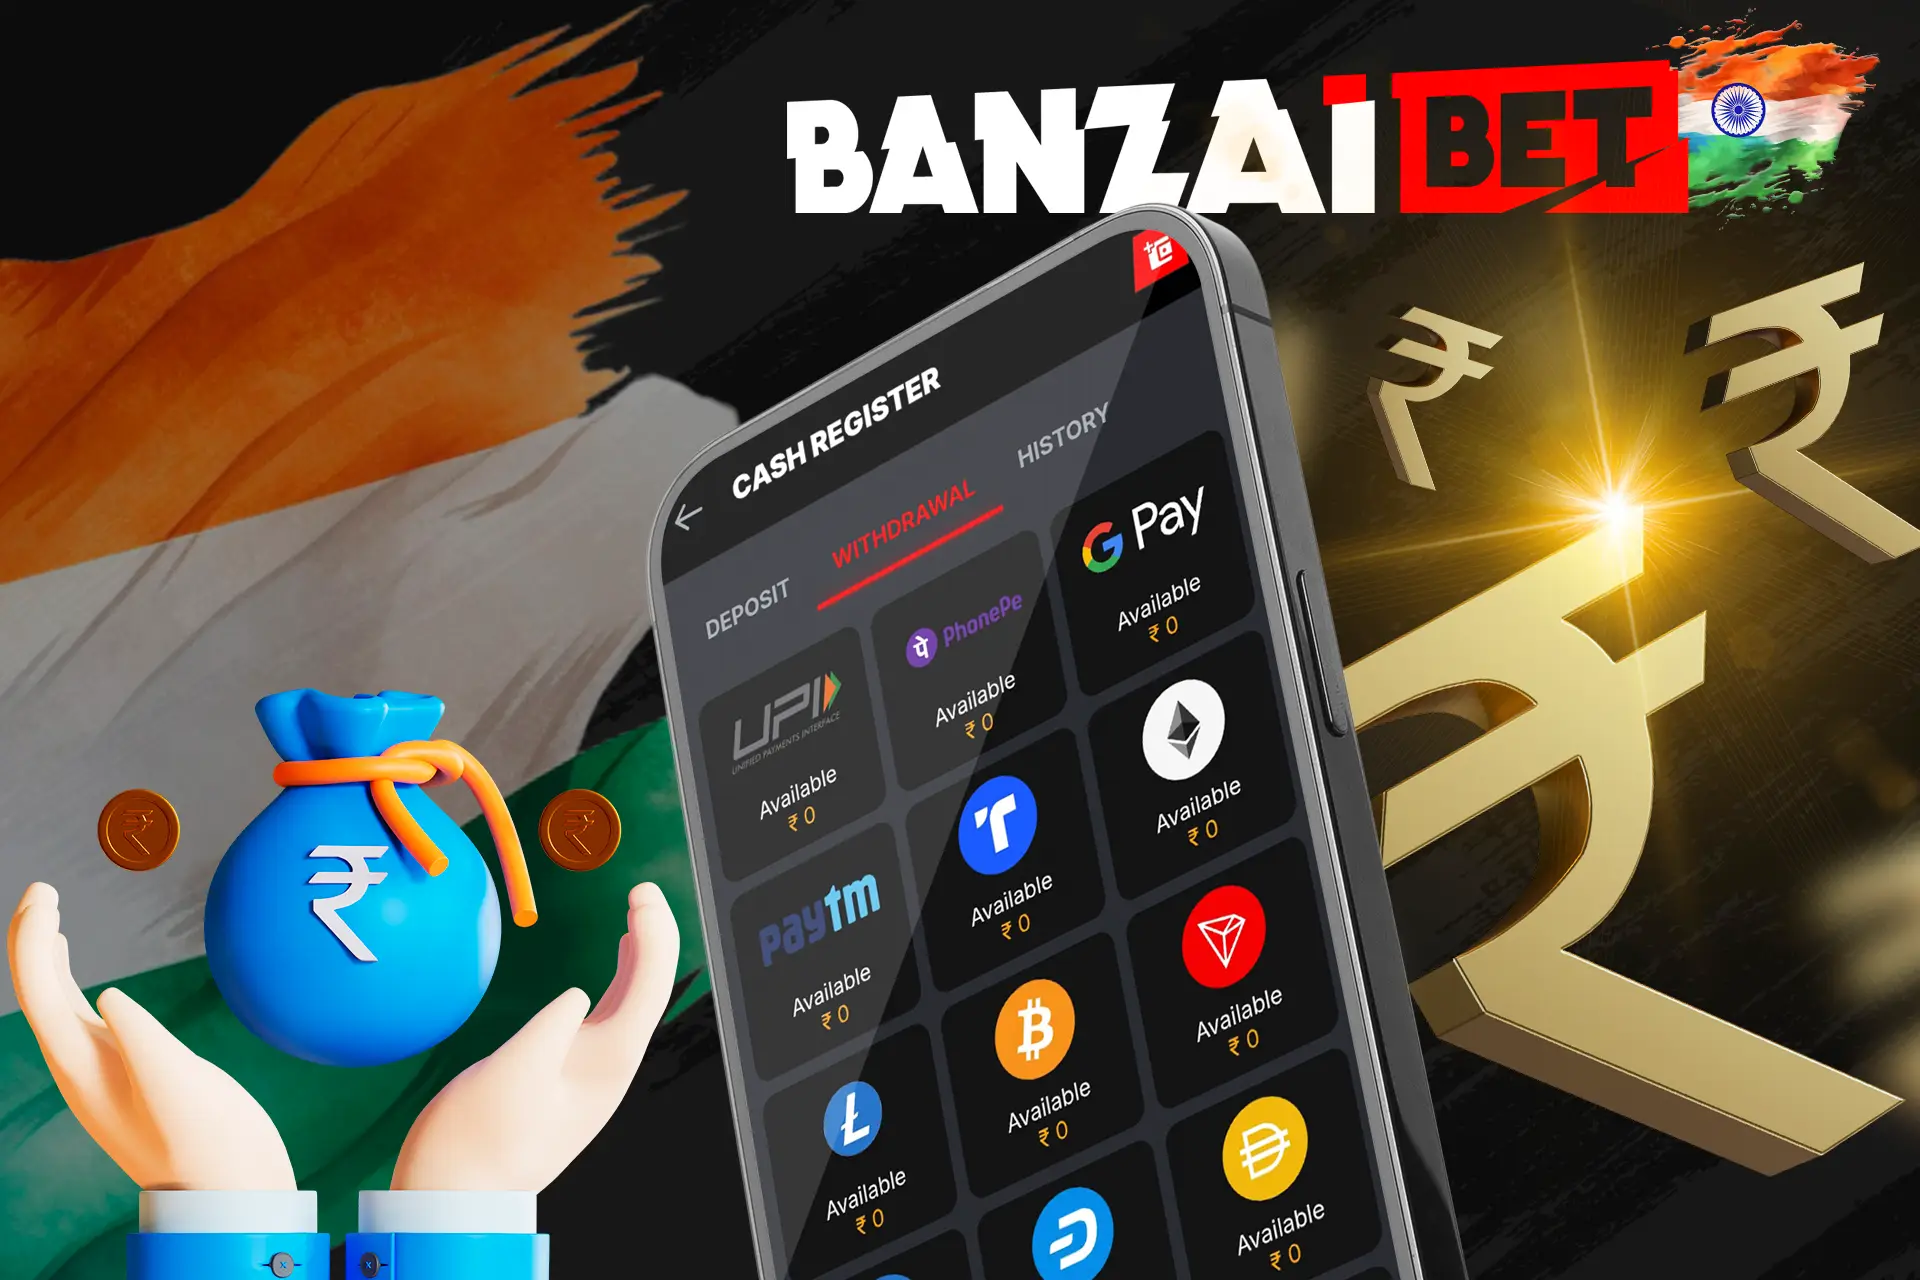 Check out the withdrawal options at Banzaibet India